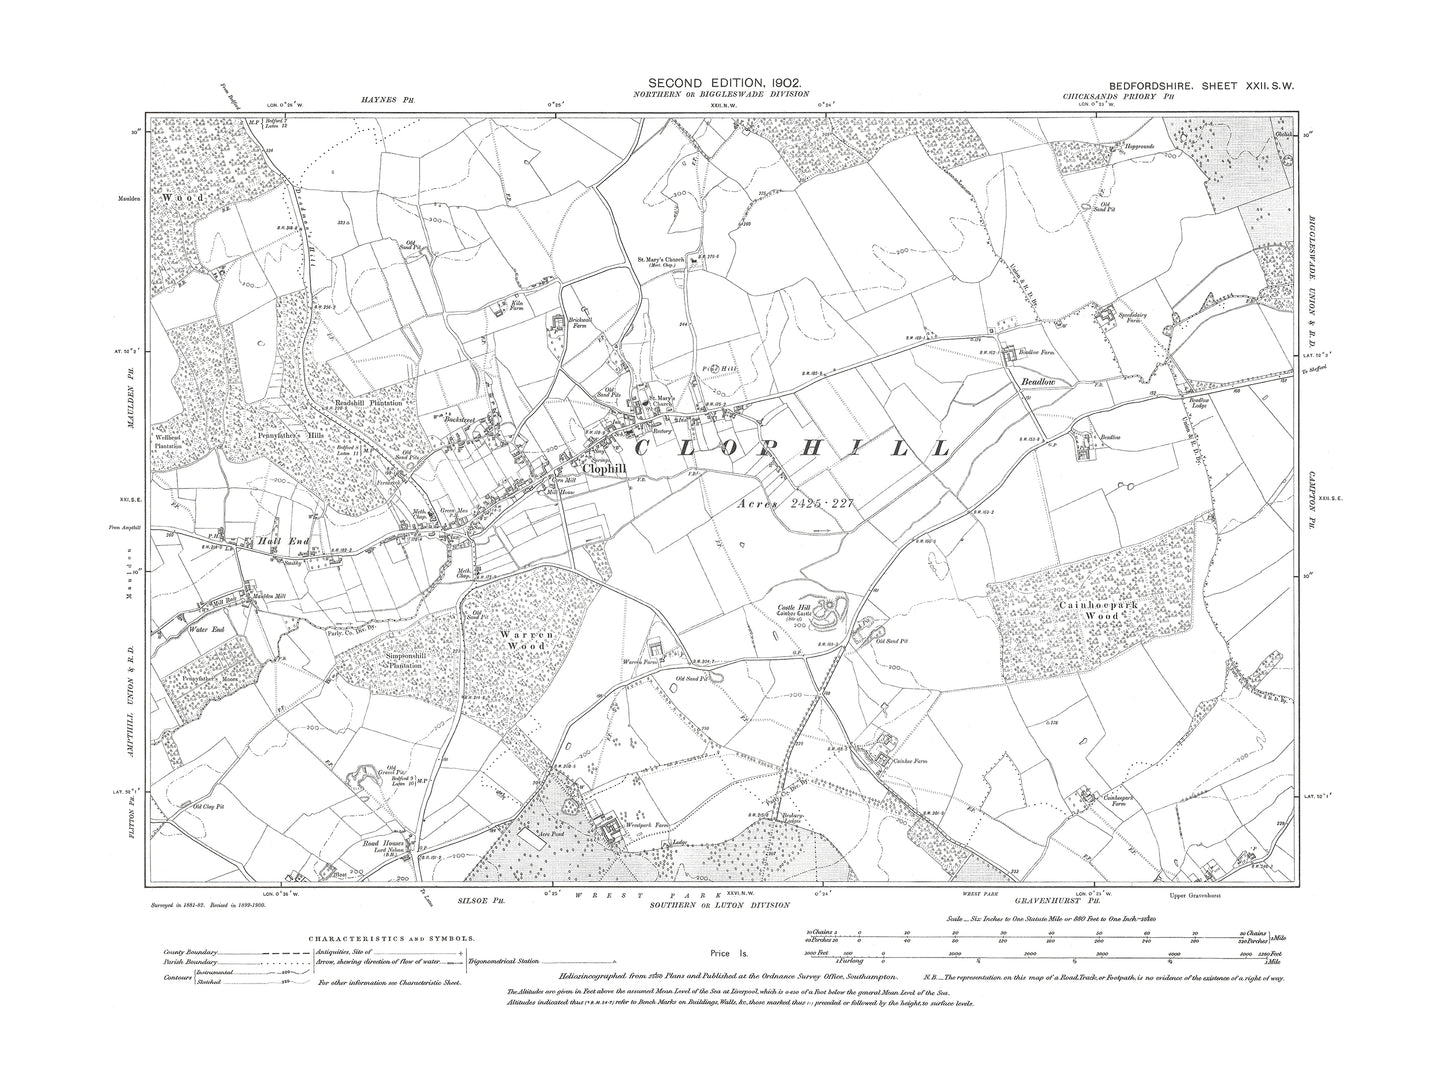 A 1902 map showing Clophill in Bedfordshire - A Digital Download 0f OS 1:10560 scale map, Beds 22SW